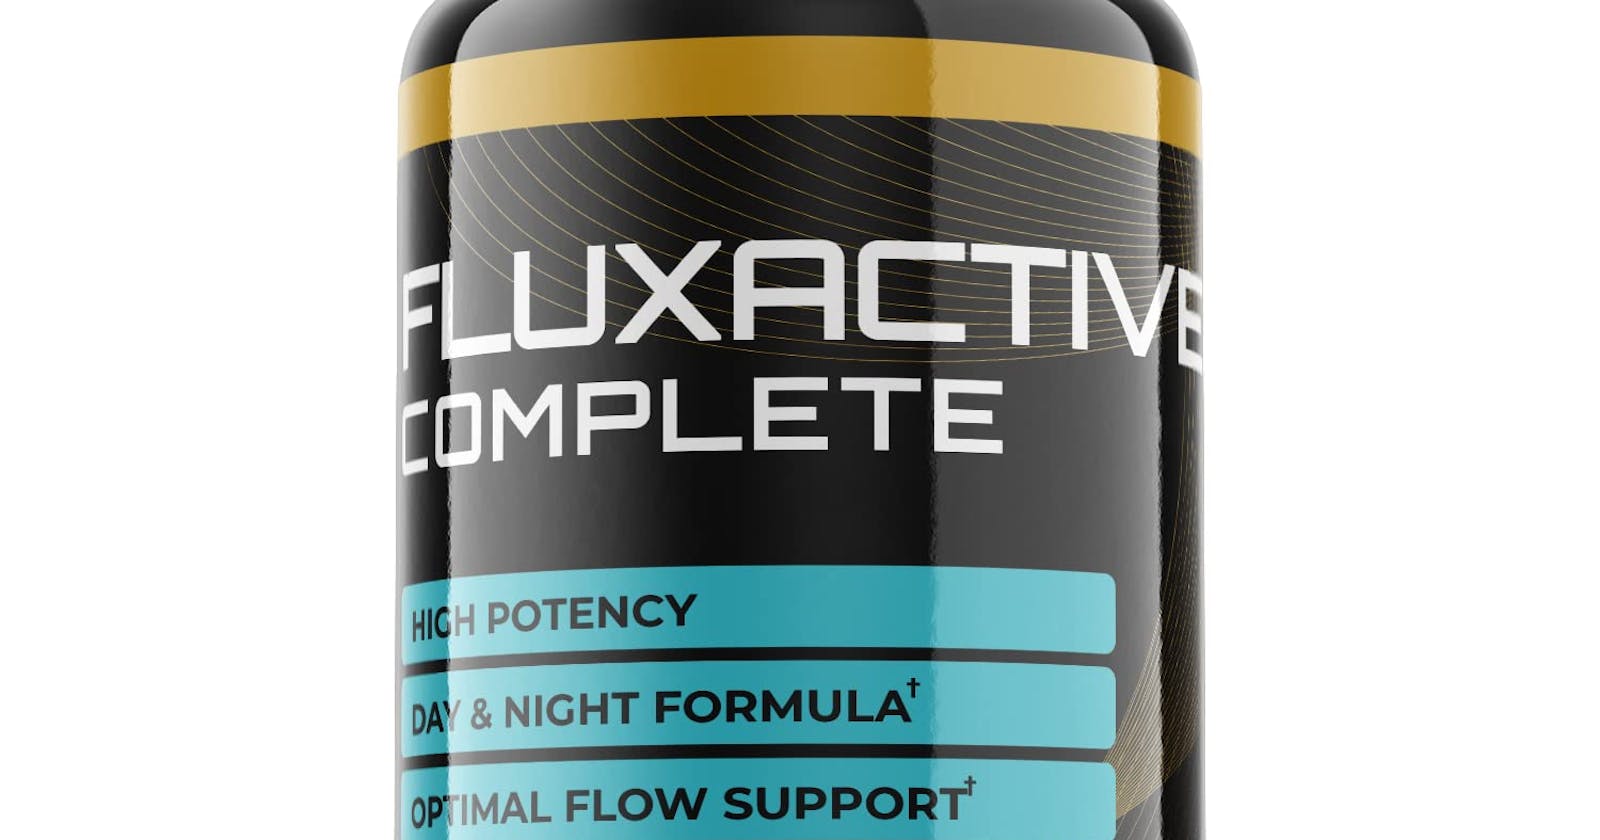 Fluxactive Complete Most Supportive Prostate Health Formula